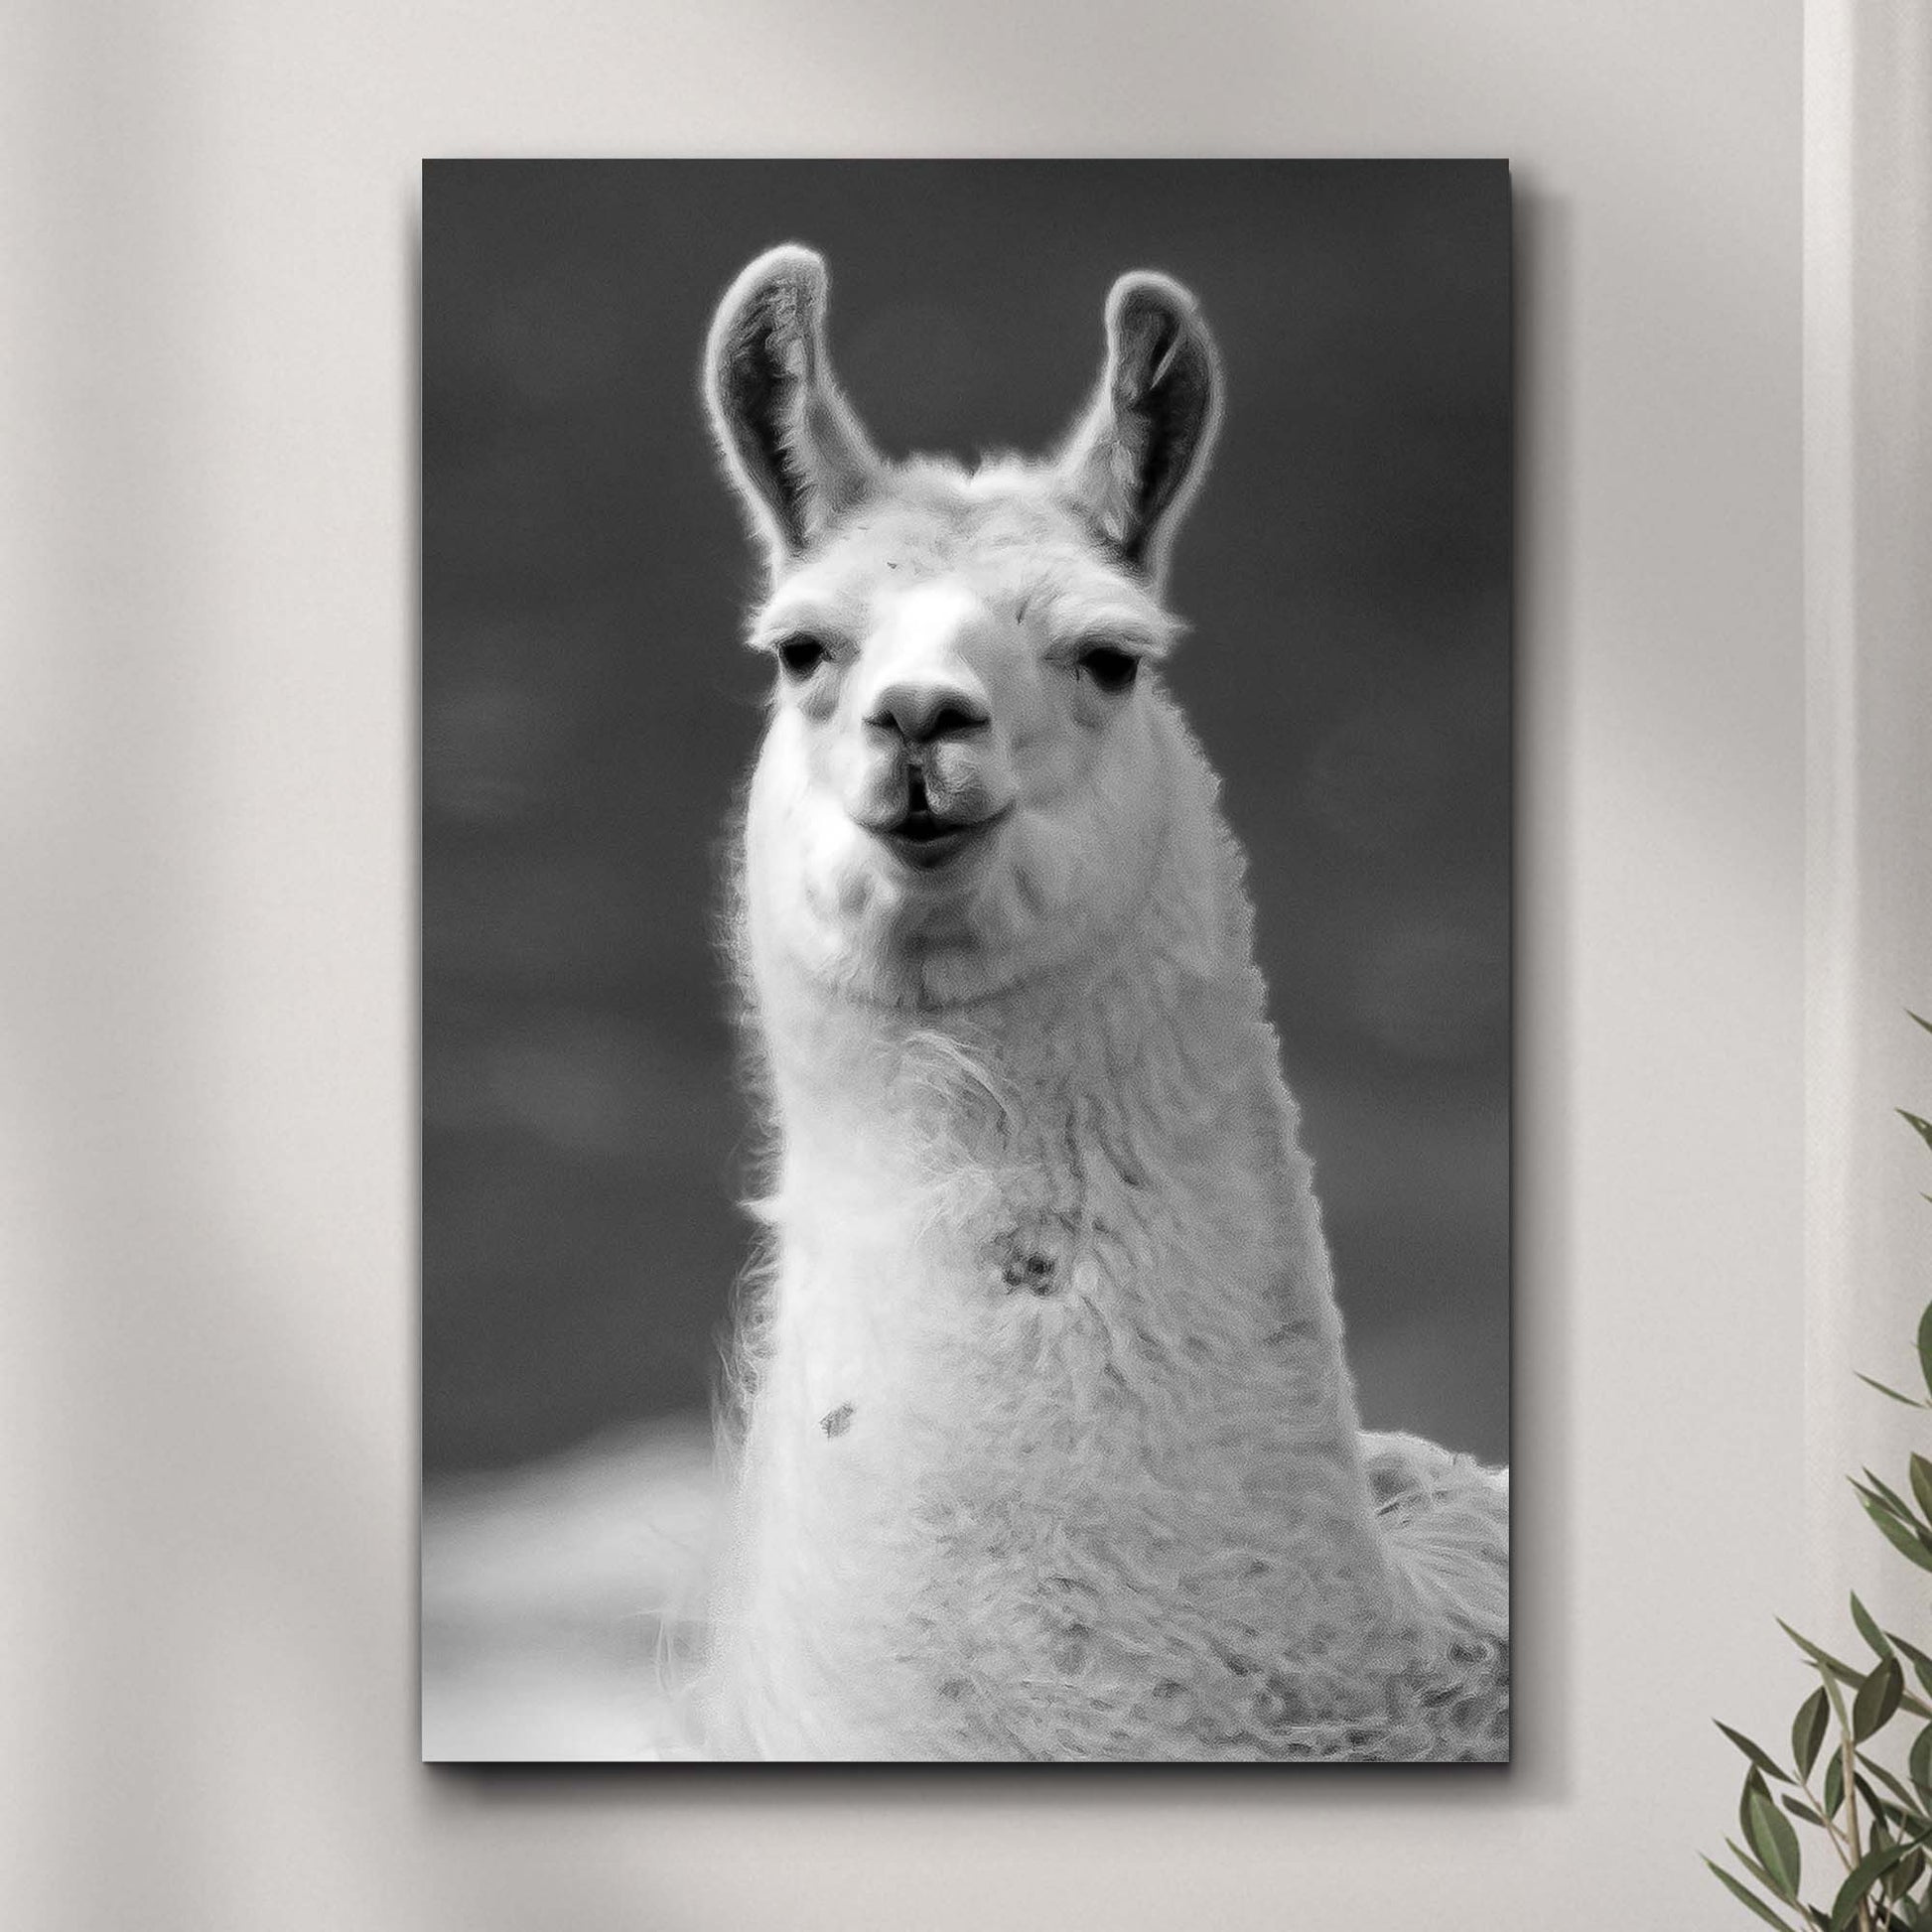 Vague Monochrome Llama Portrait Canvas Wall Art Style 1 - Image by Tailored Canvases